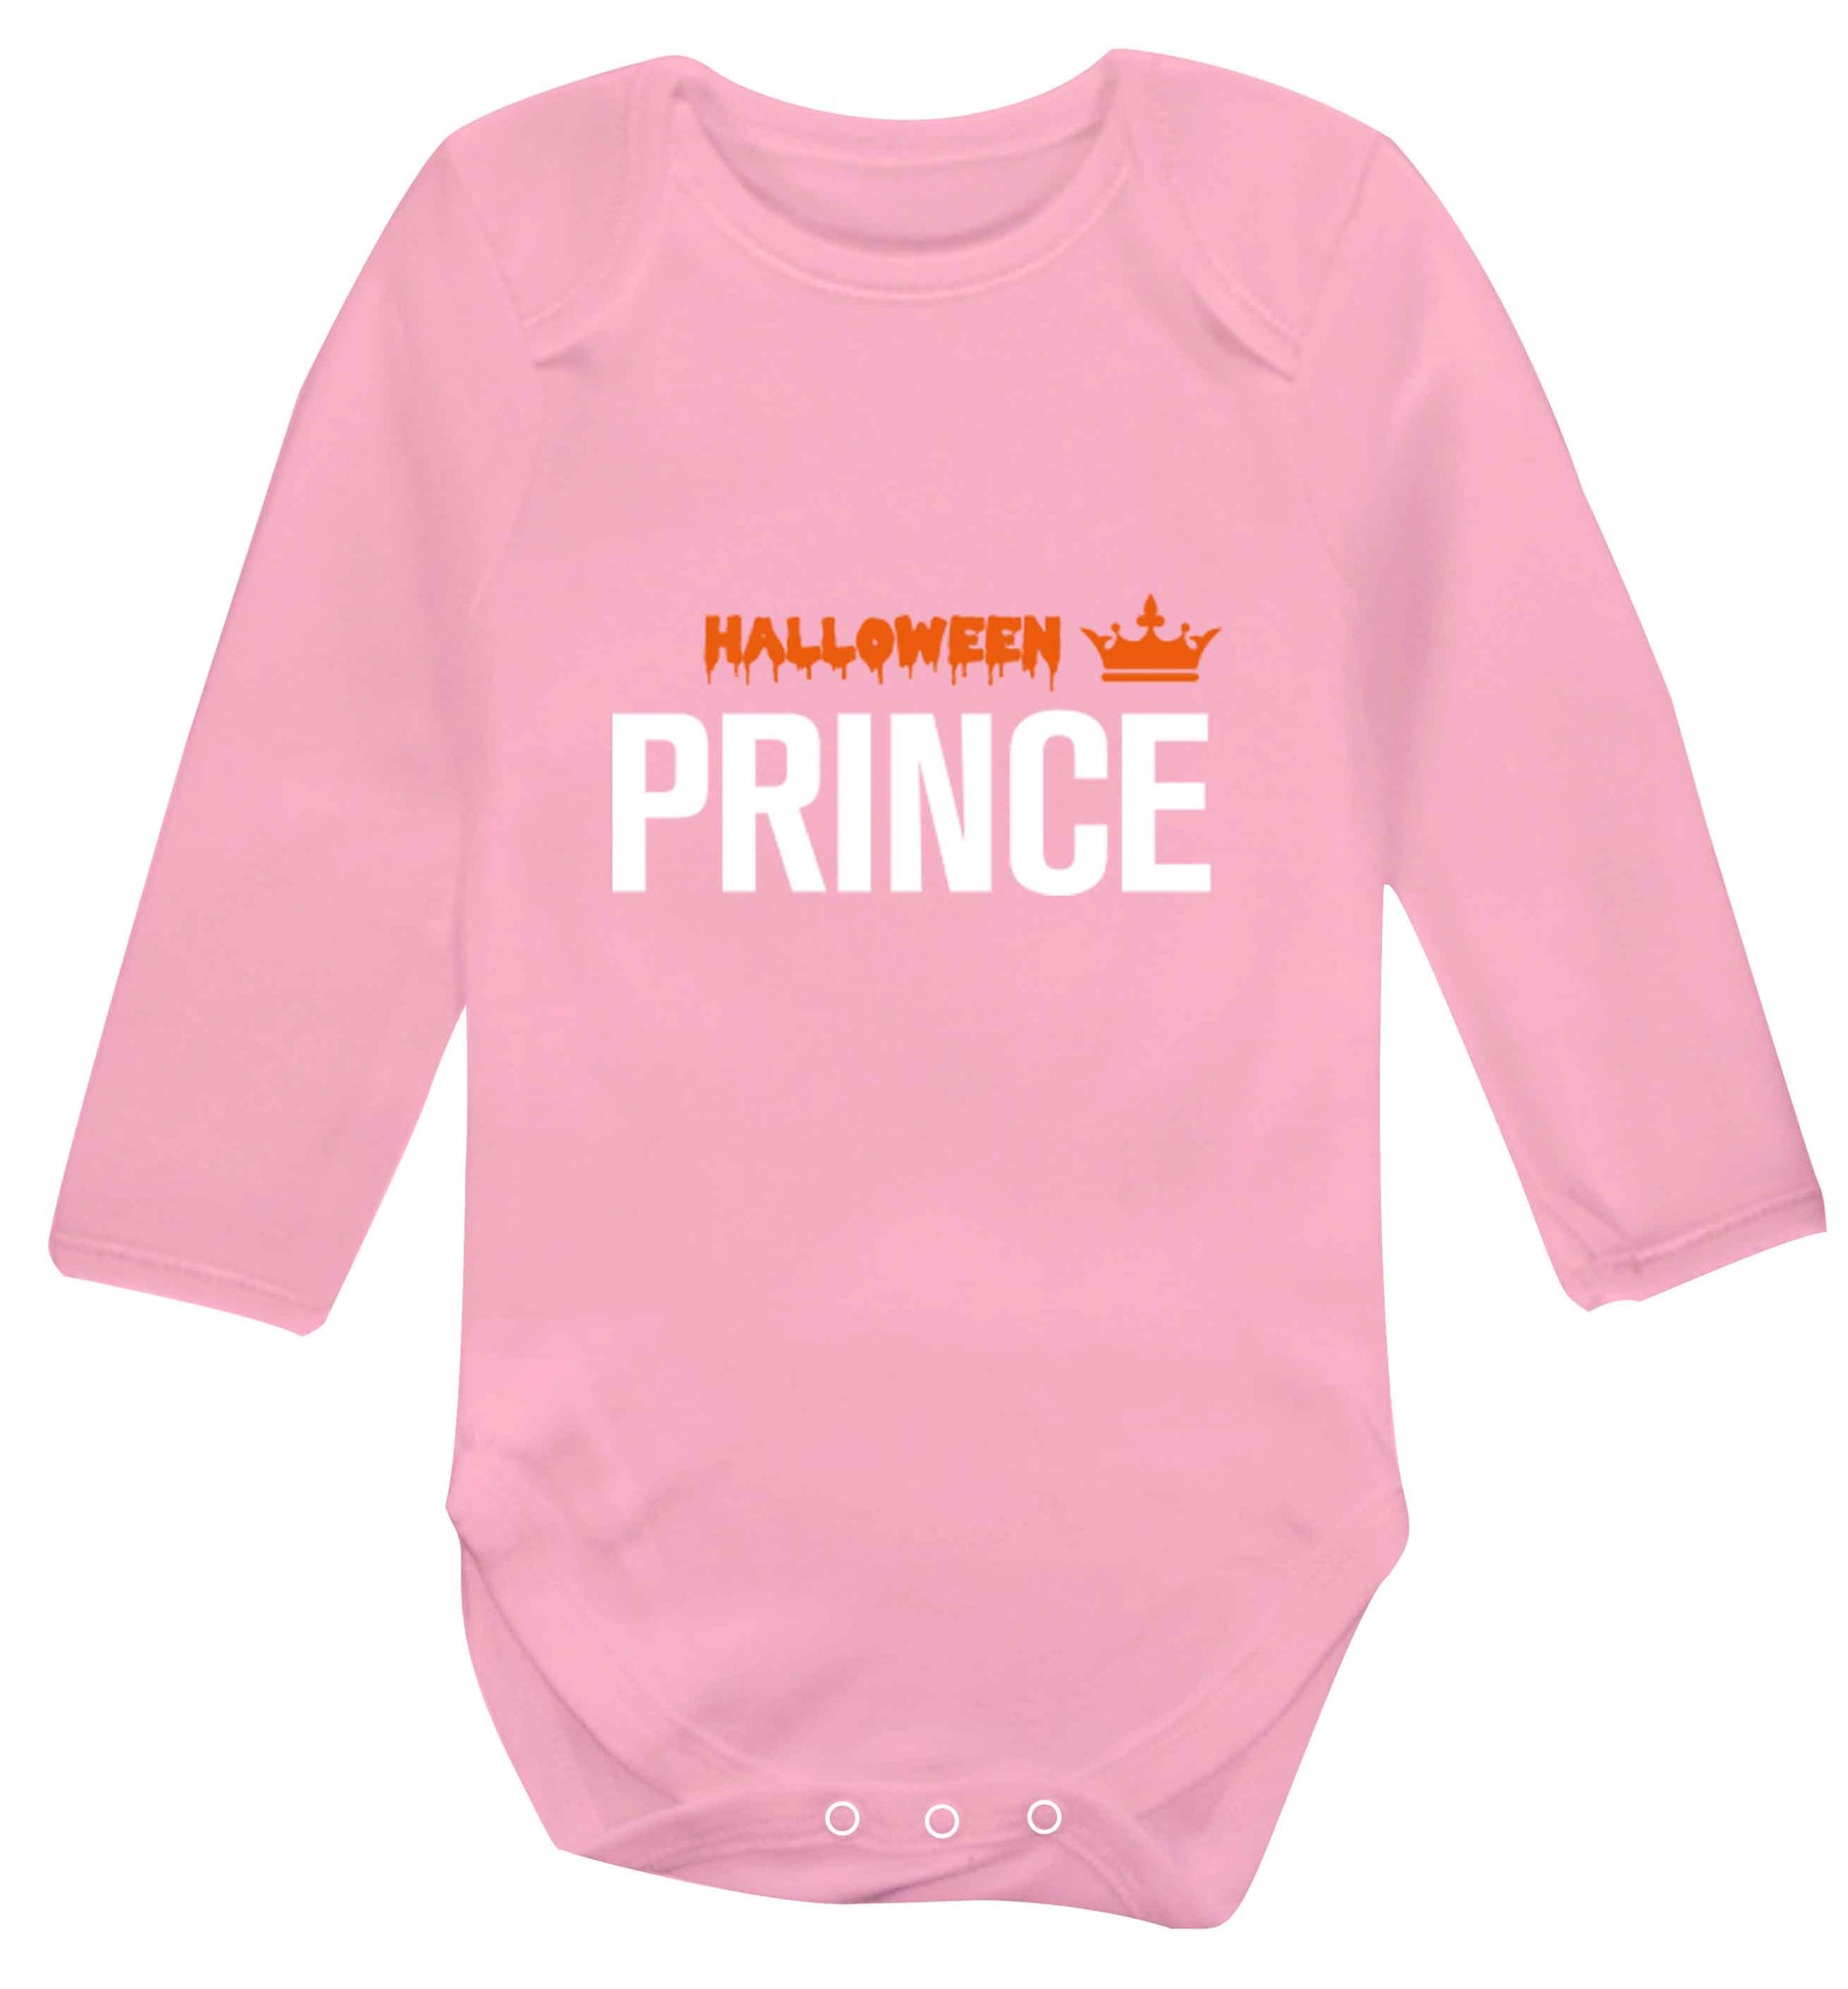 Halloween prince baby vest long sleeved pale pink 6-12 months